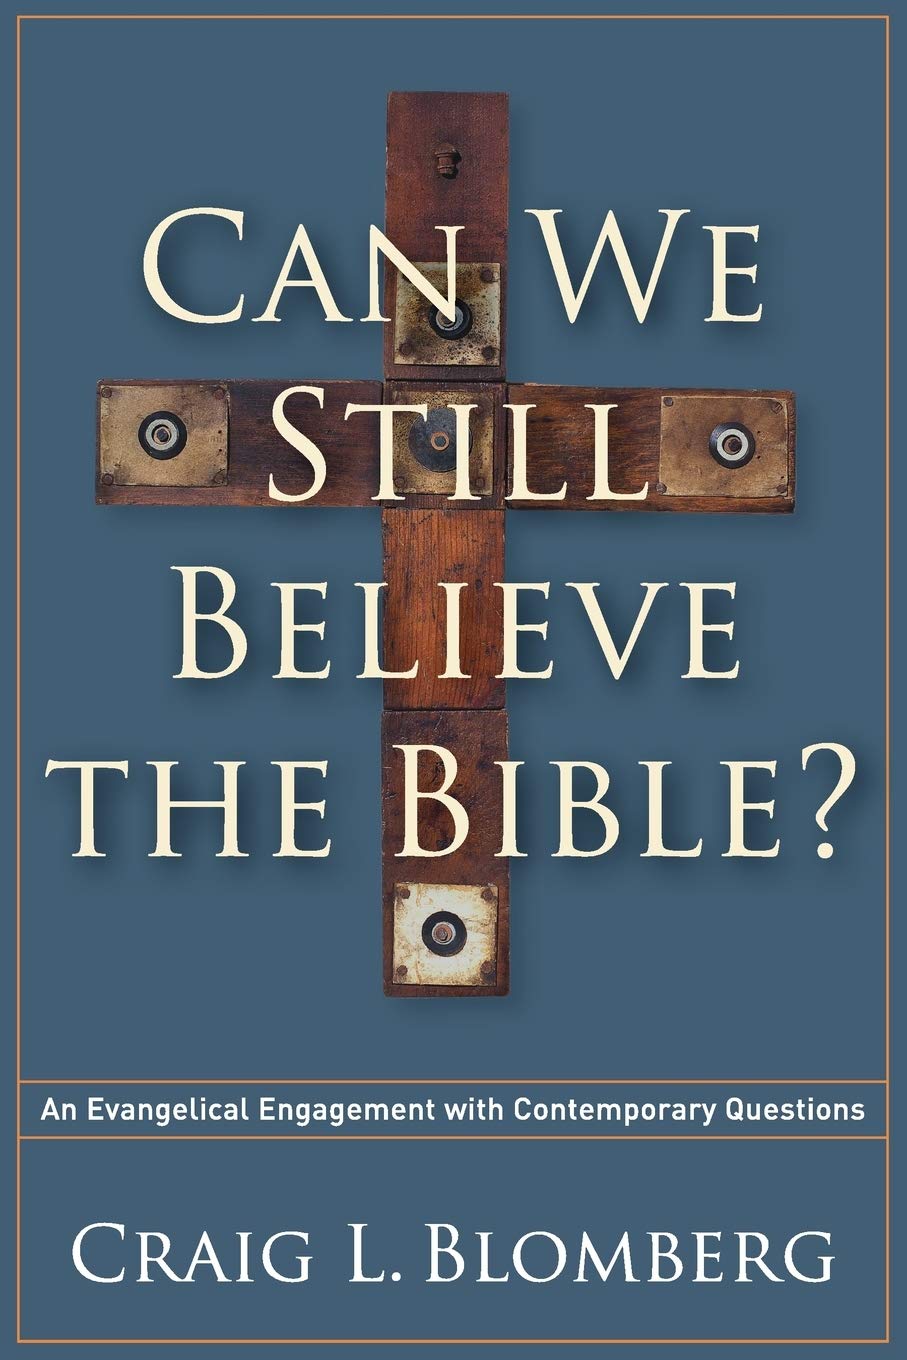 Download PDF] Can We Still Believe the Bible?: An Evangelical Engagement  with Contemporary Questions - Craig L. Blomberg - فريق اللاهوت الدفاعي